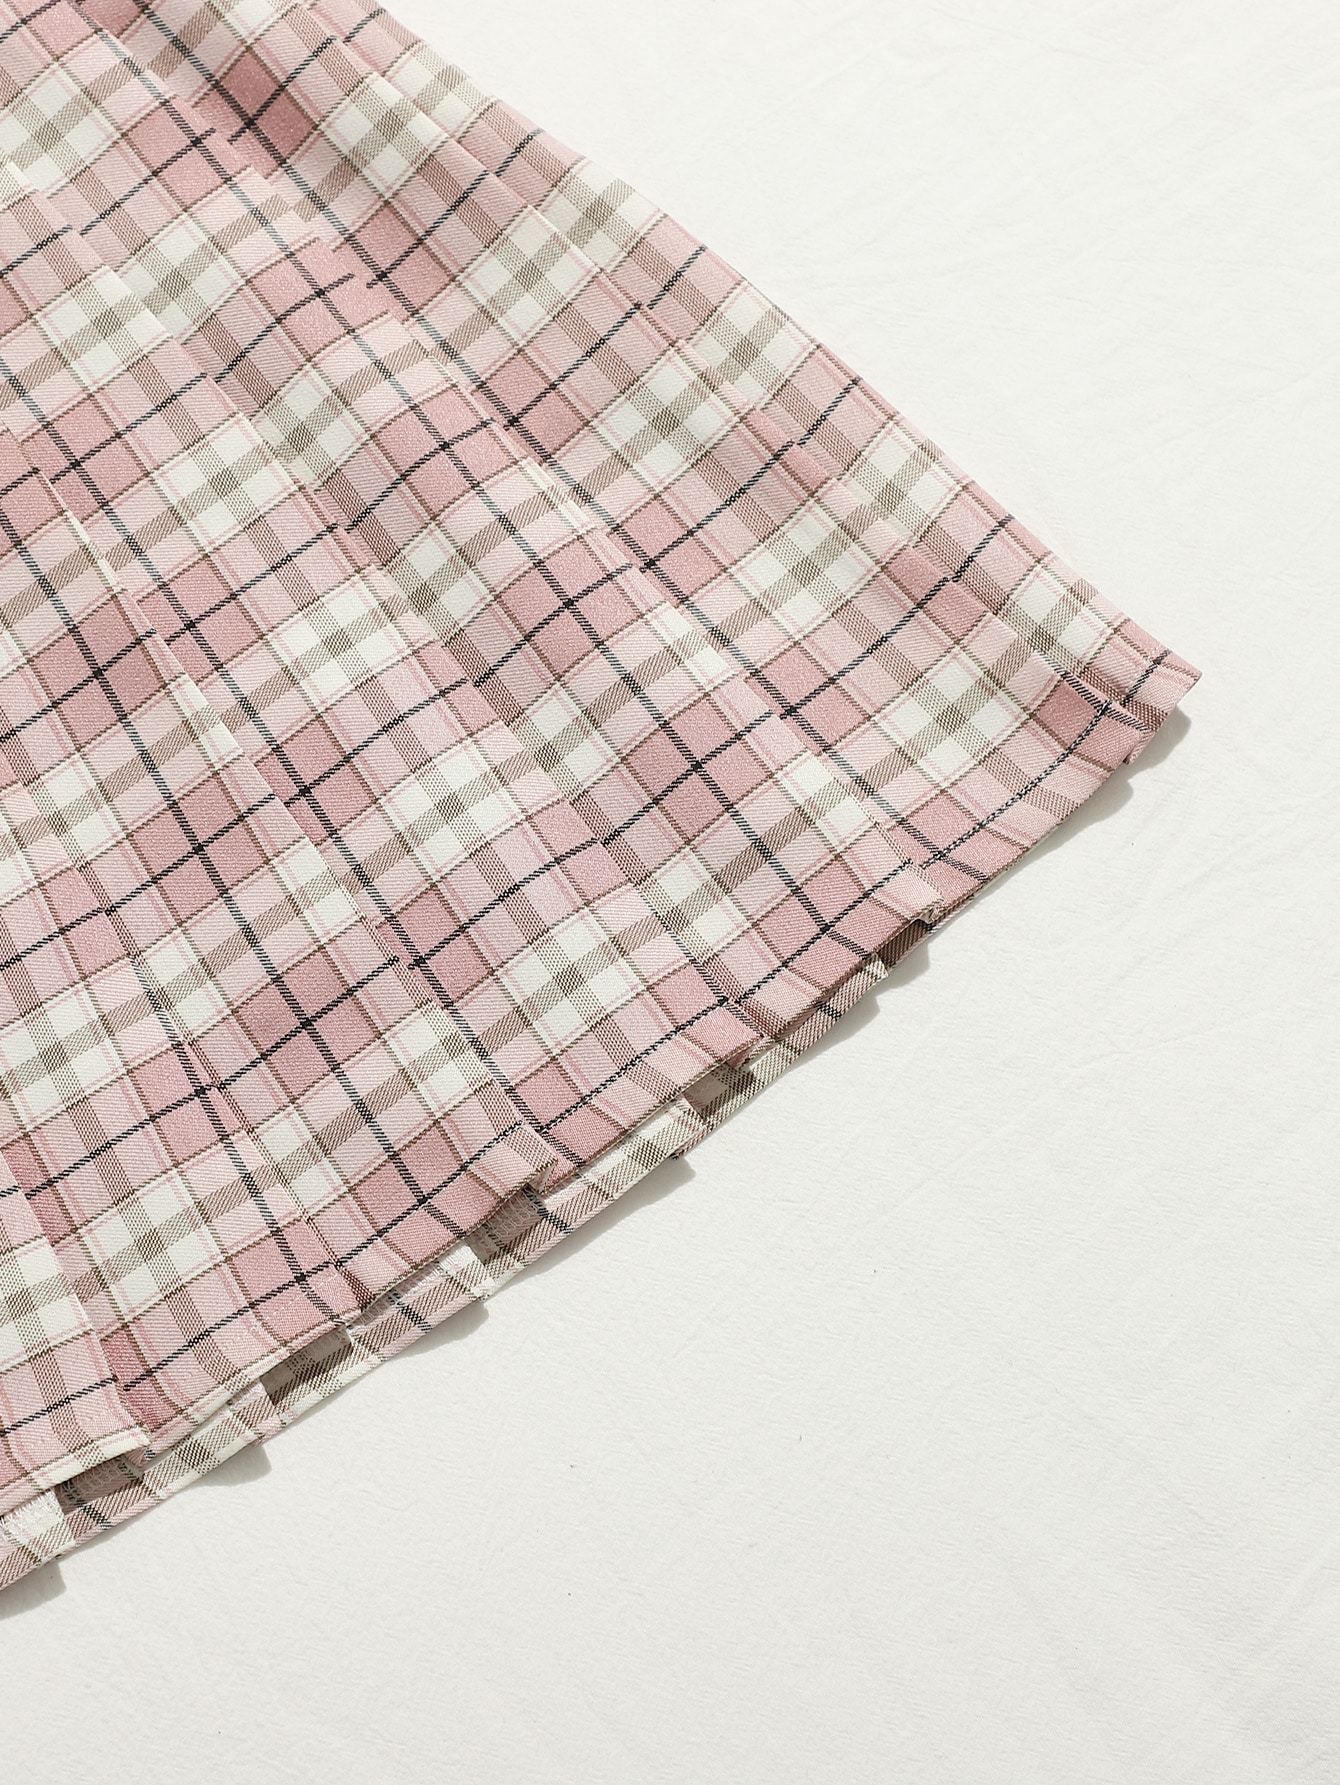 Plus Tartan Pleated Skirt - INS | Online Fashion Free Shipping Clothing, Dresses, Tops, Shoes